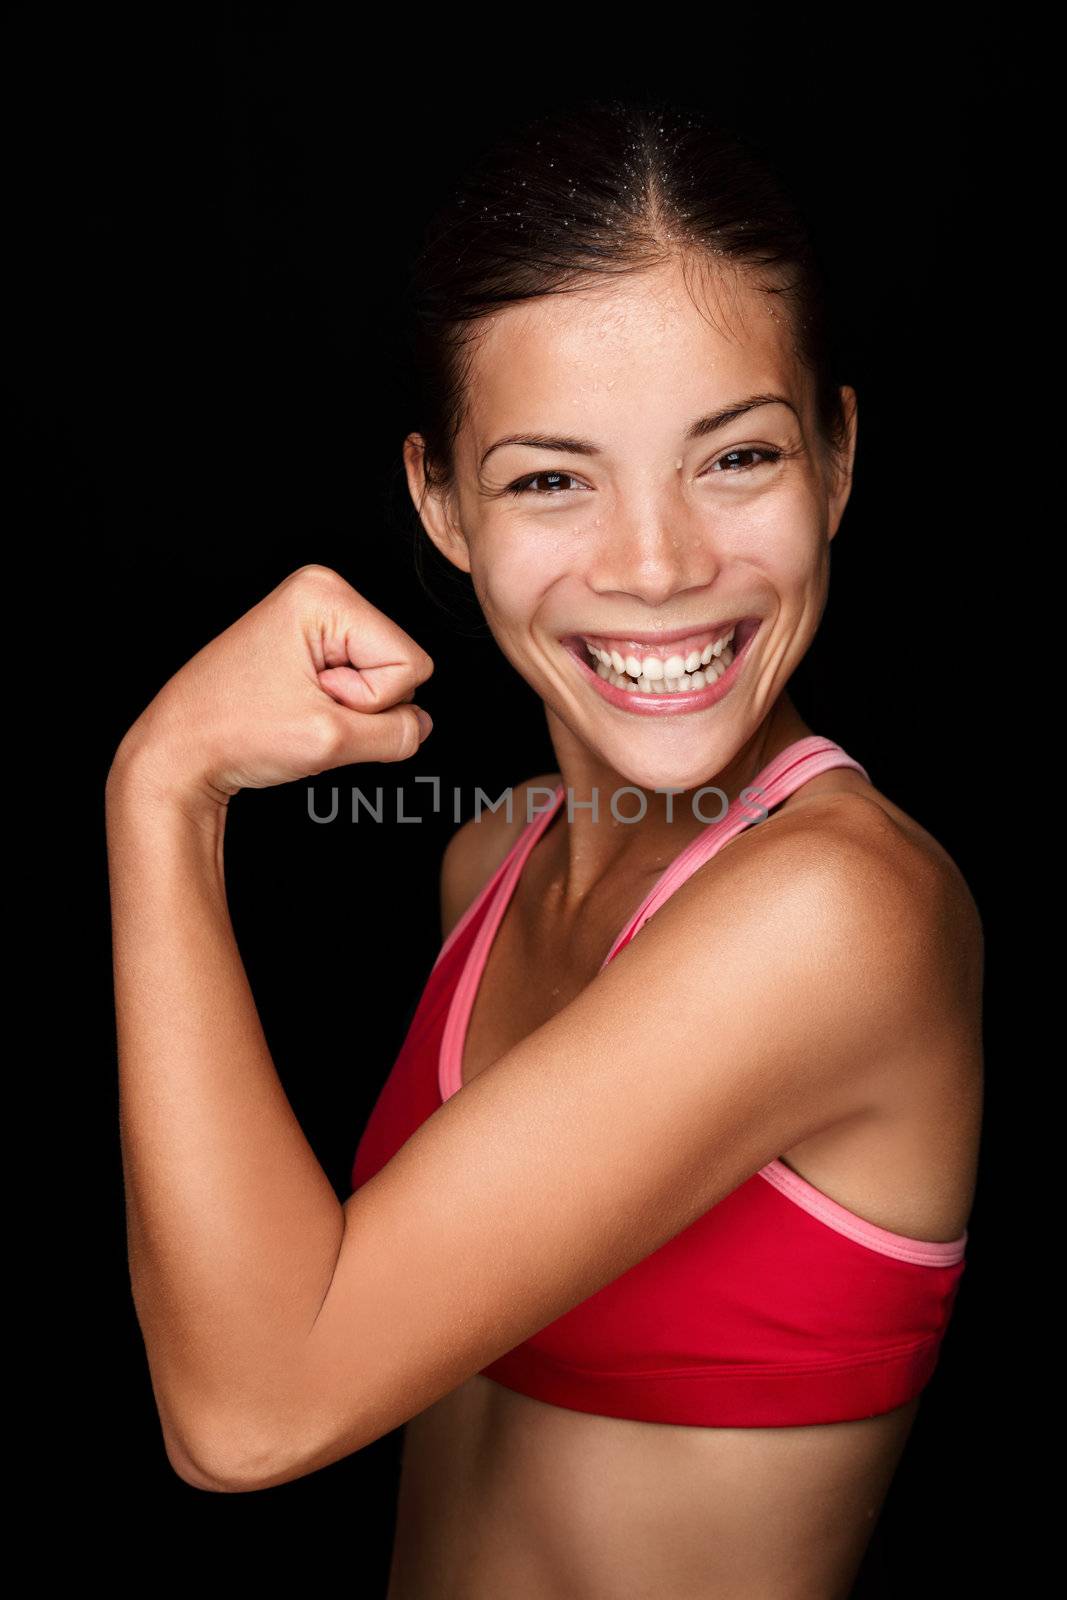 Playful young female Asian athlete flexing her arm with a mischievous smile to display her arm muscles. Fun upper body portrait on a black background